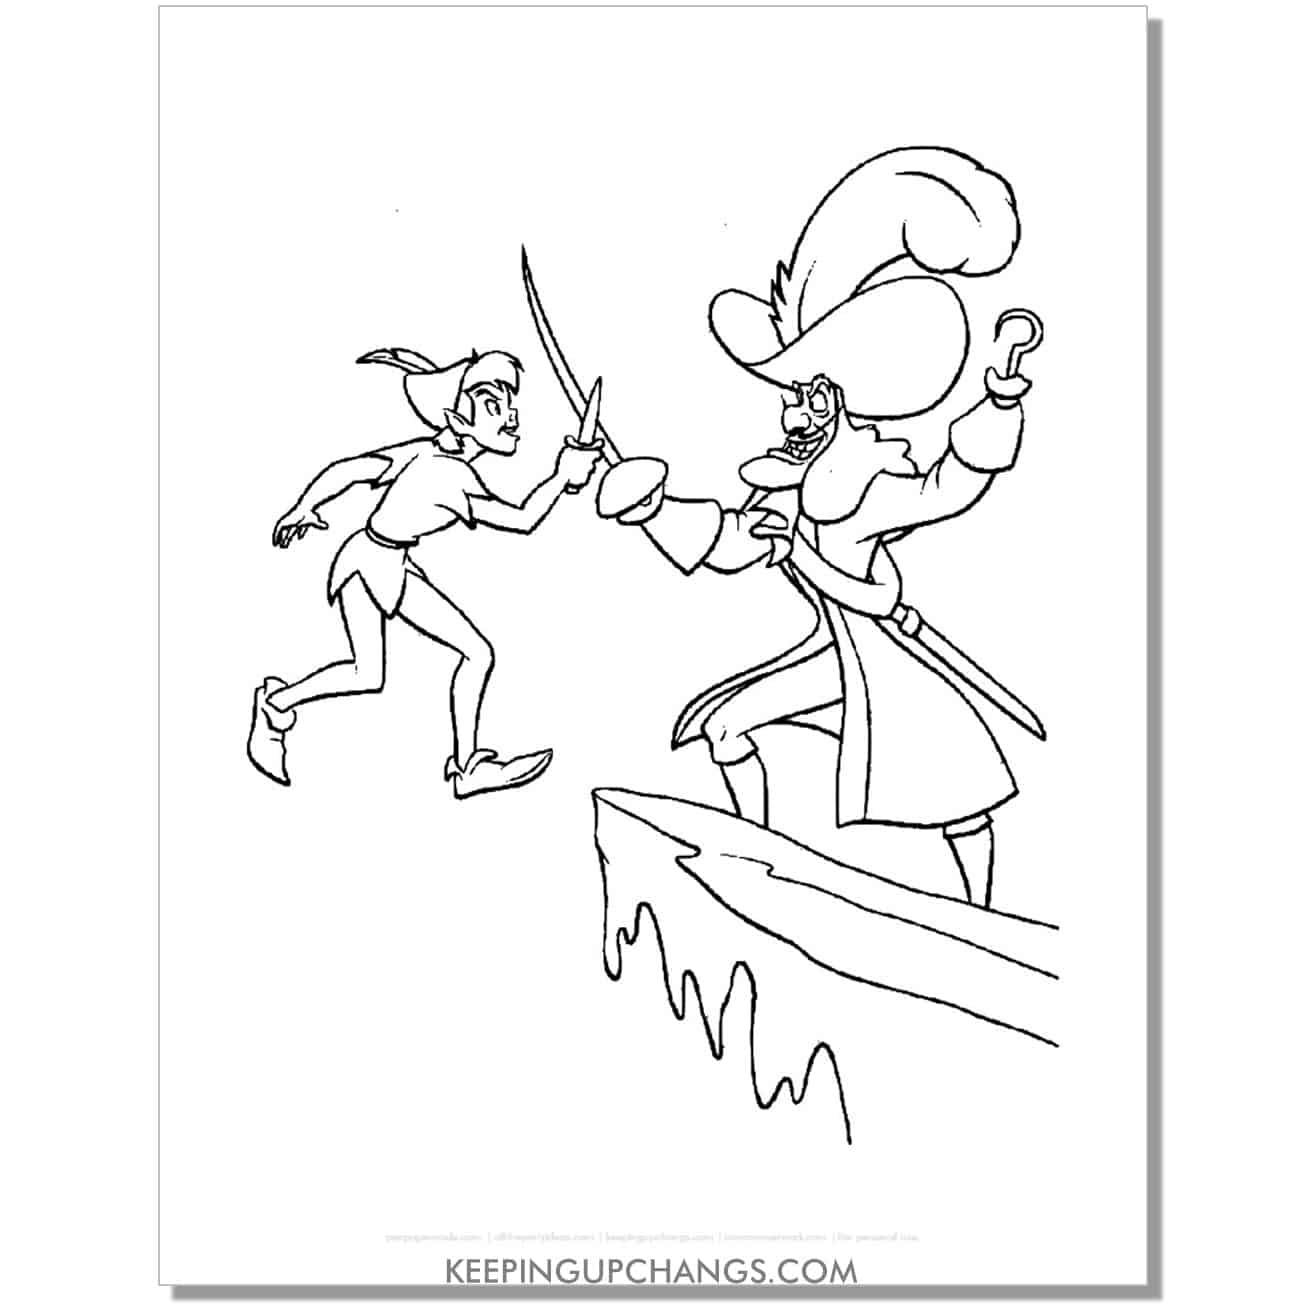 captain hook in a knife and sword fight with peter pan coloring page, sheet.